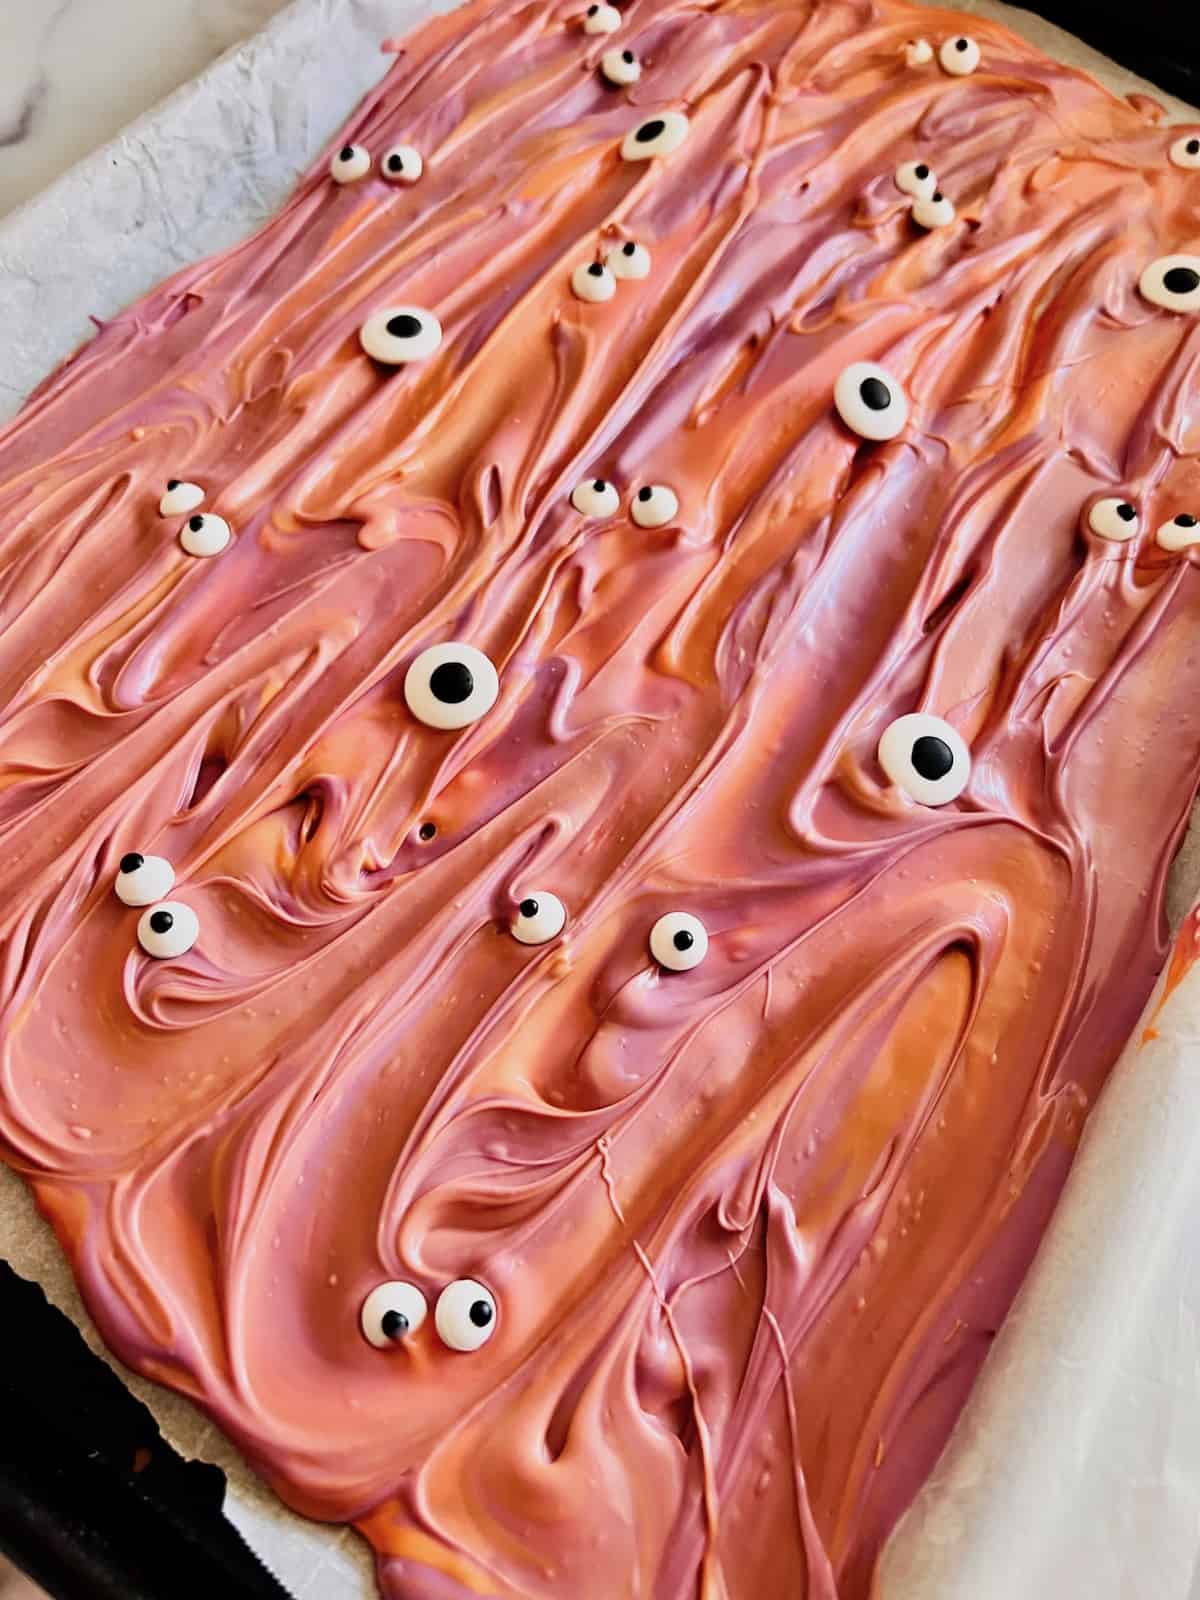 Orange and purple melted candy topped with candy eyeballs.